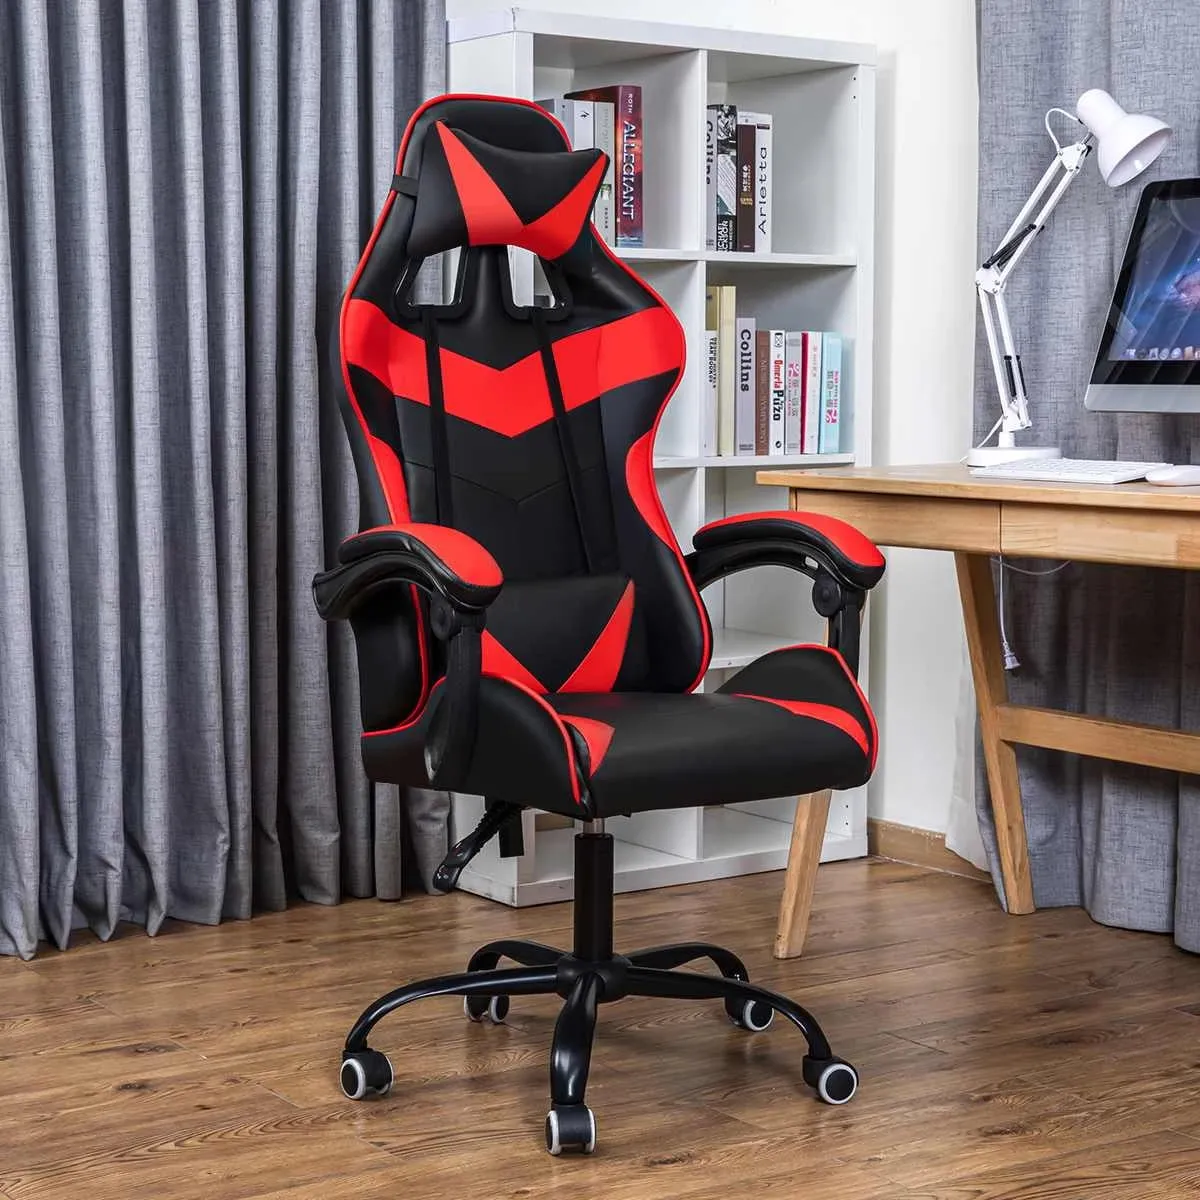 red and black coloured recliner, bedroom gaming setup